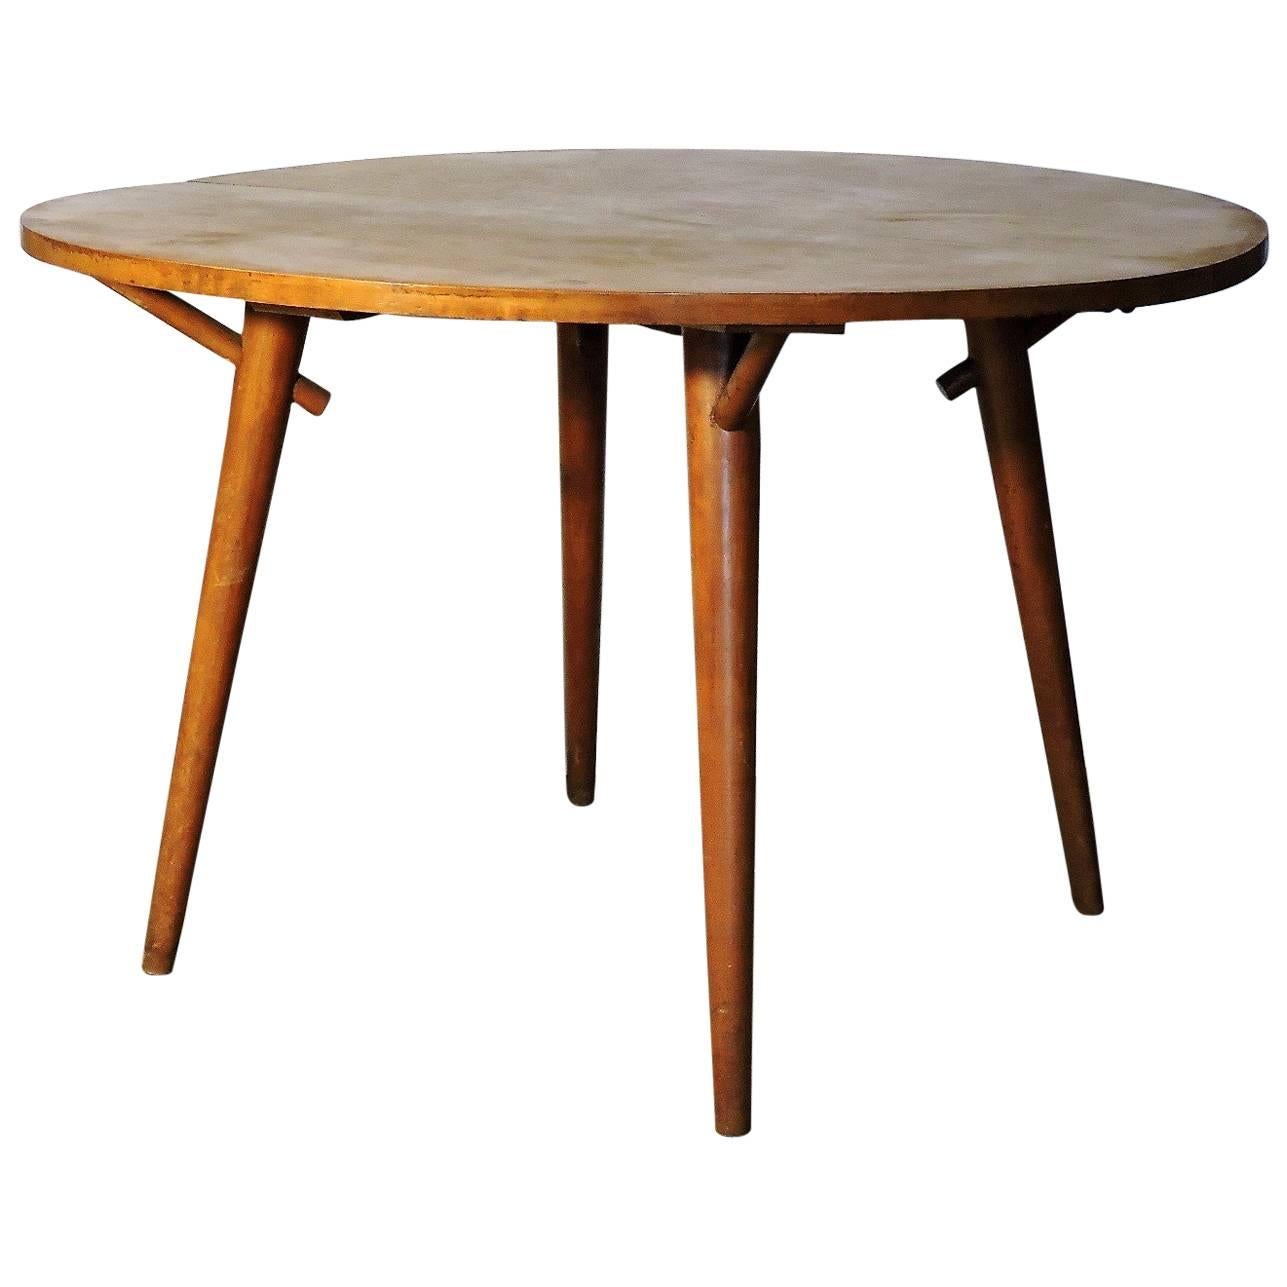 Russel Wright American Modern Extension Dining Table for Conant Ball